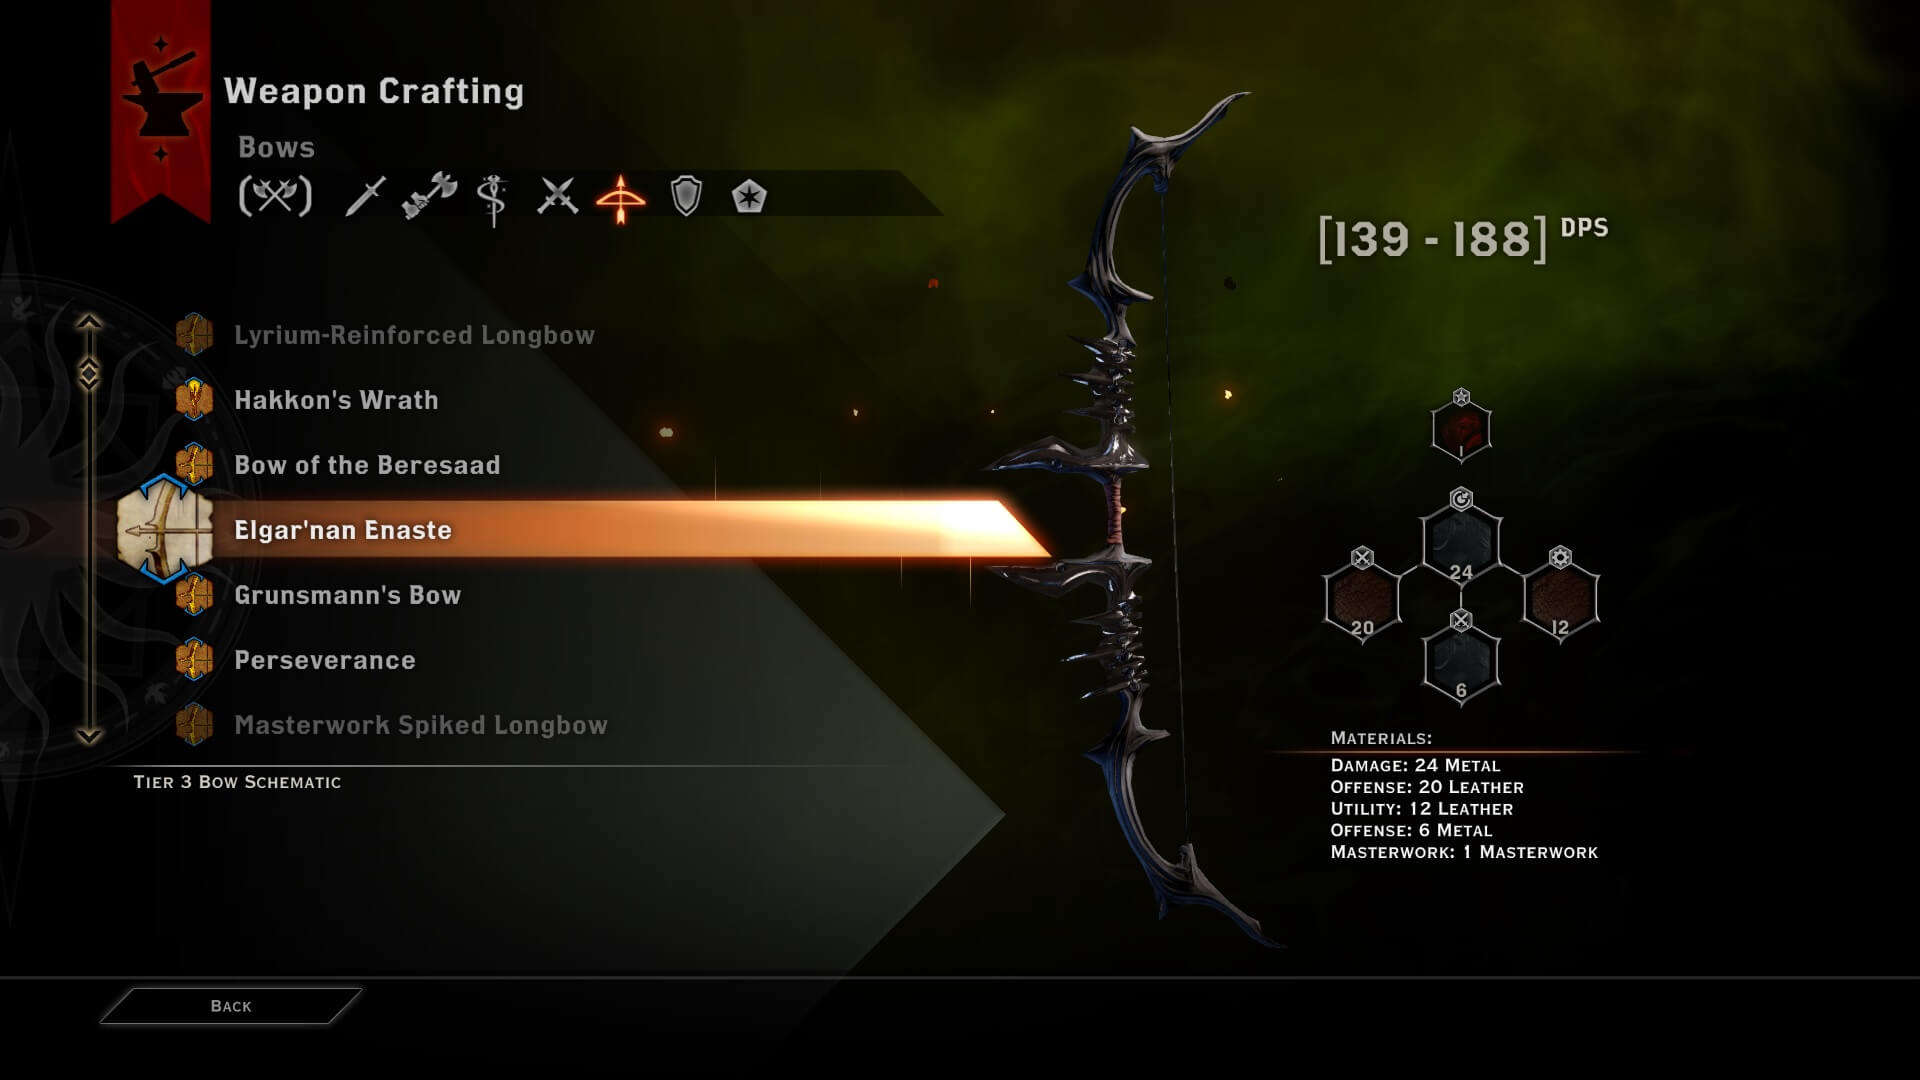 Lingvistik Polering Intens Dragon Age Inquisition: Guide to the Best Weapons | Dragon Inquisition